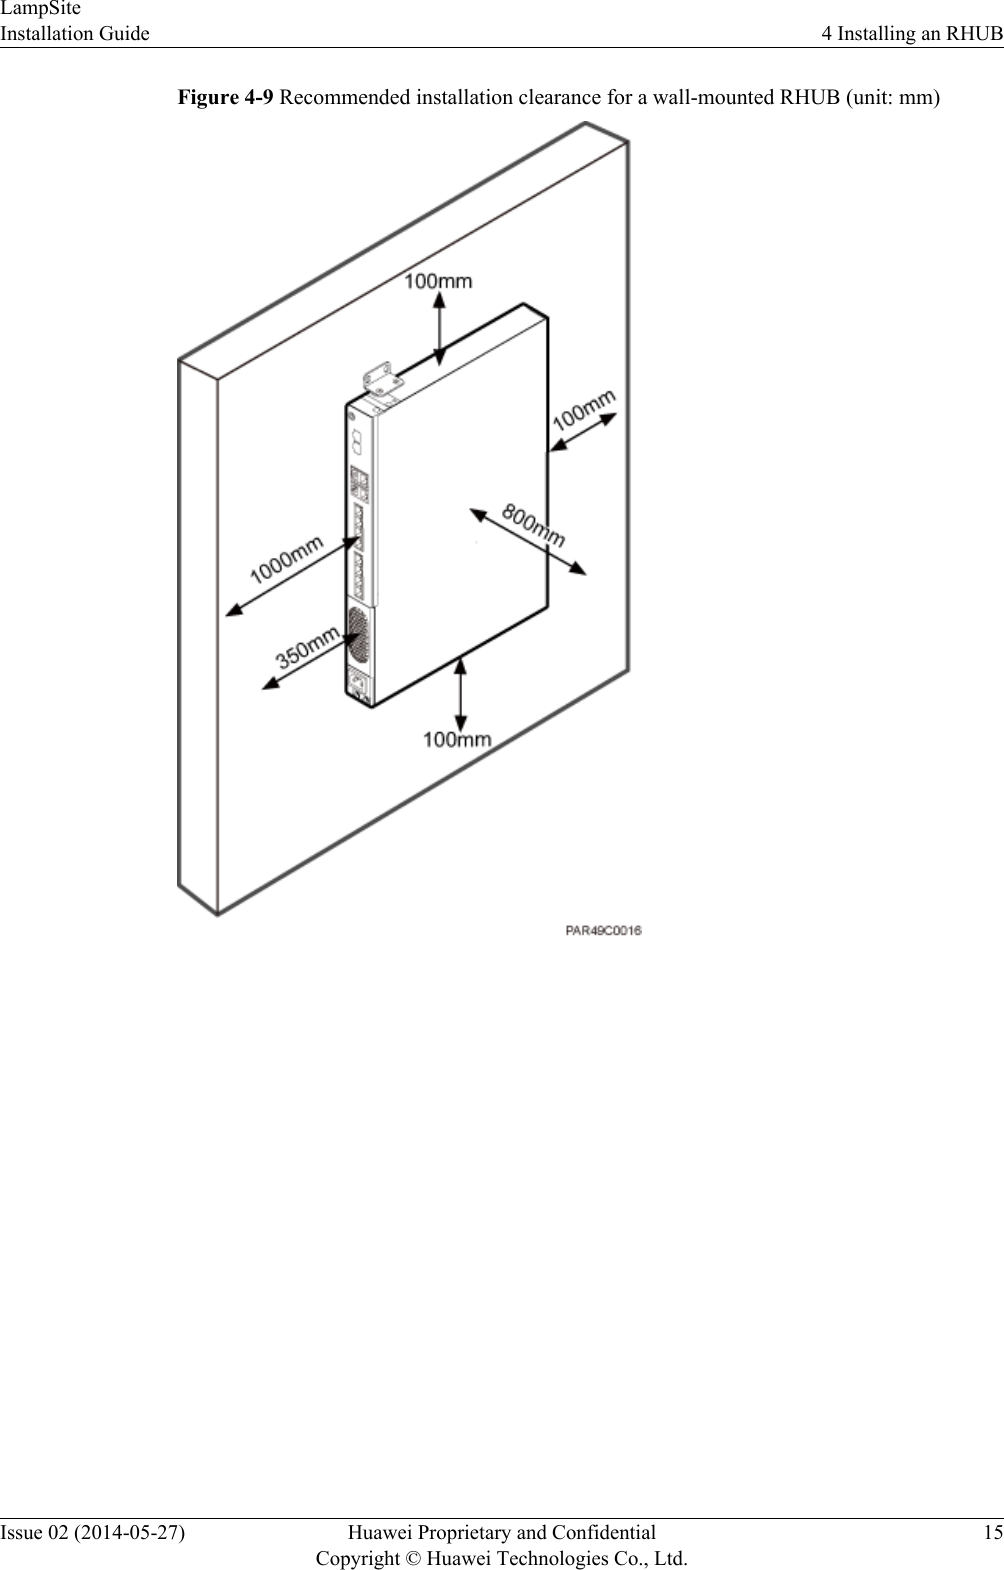 Figure 4-9 Recommended installation clearance for a wall-mounted RHUB (unit: mm)LampSiteInstallation Guide 4 Installing an RHUBIssue 02 (2014-05-27) Huawei Proprietary and ConfidentialCopyright © Huawei Technologies Co., Ltd.15